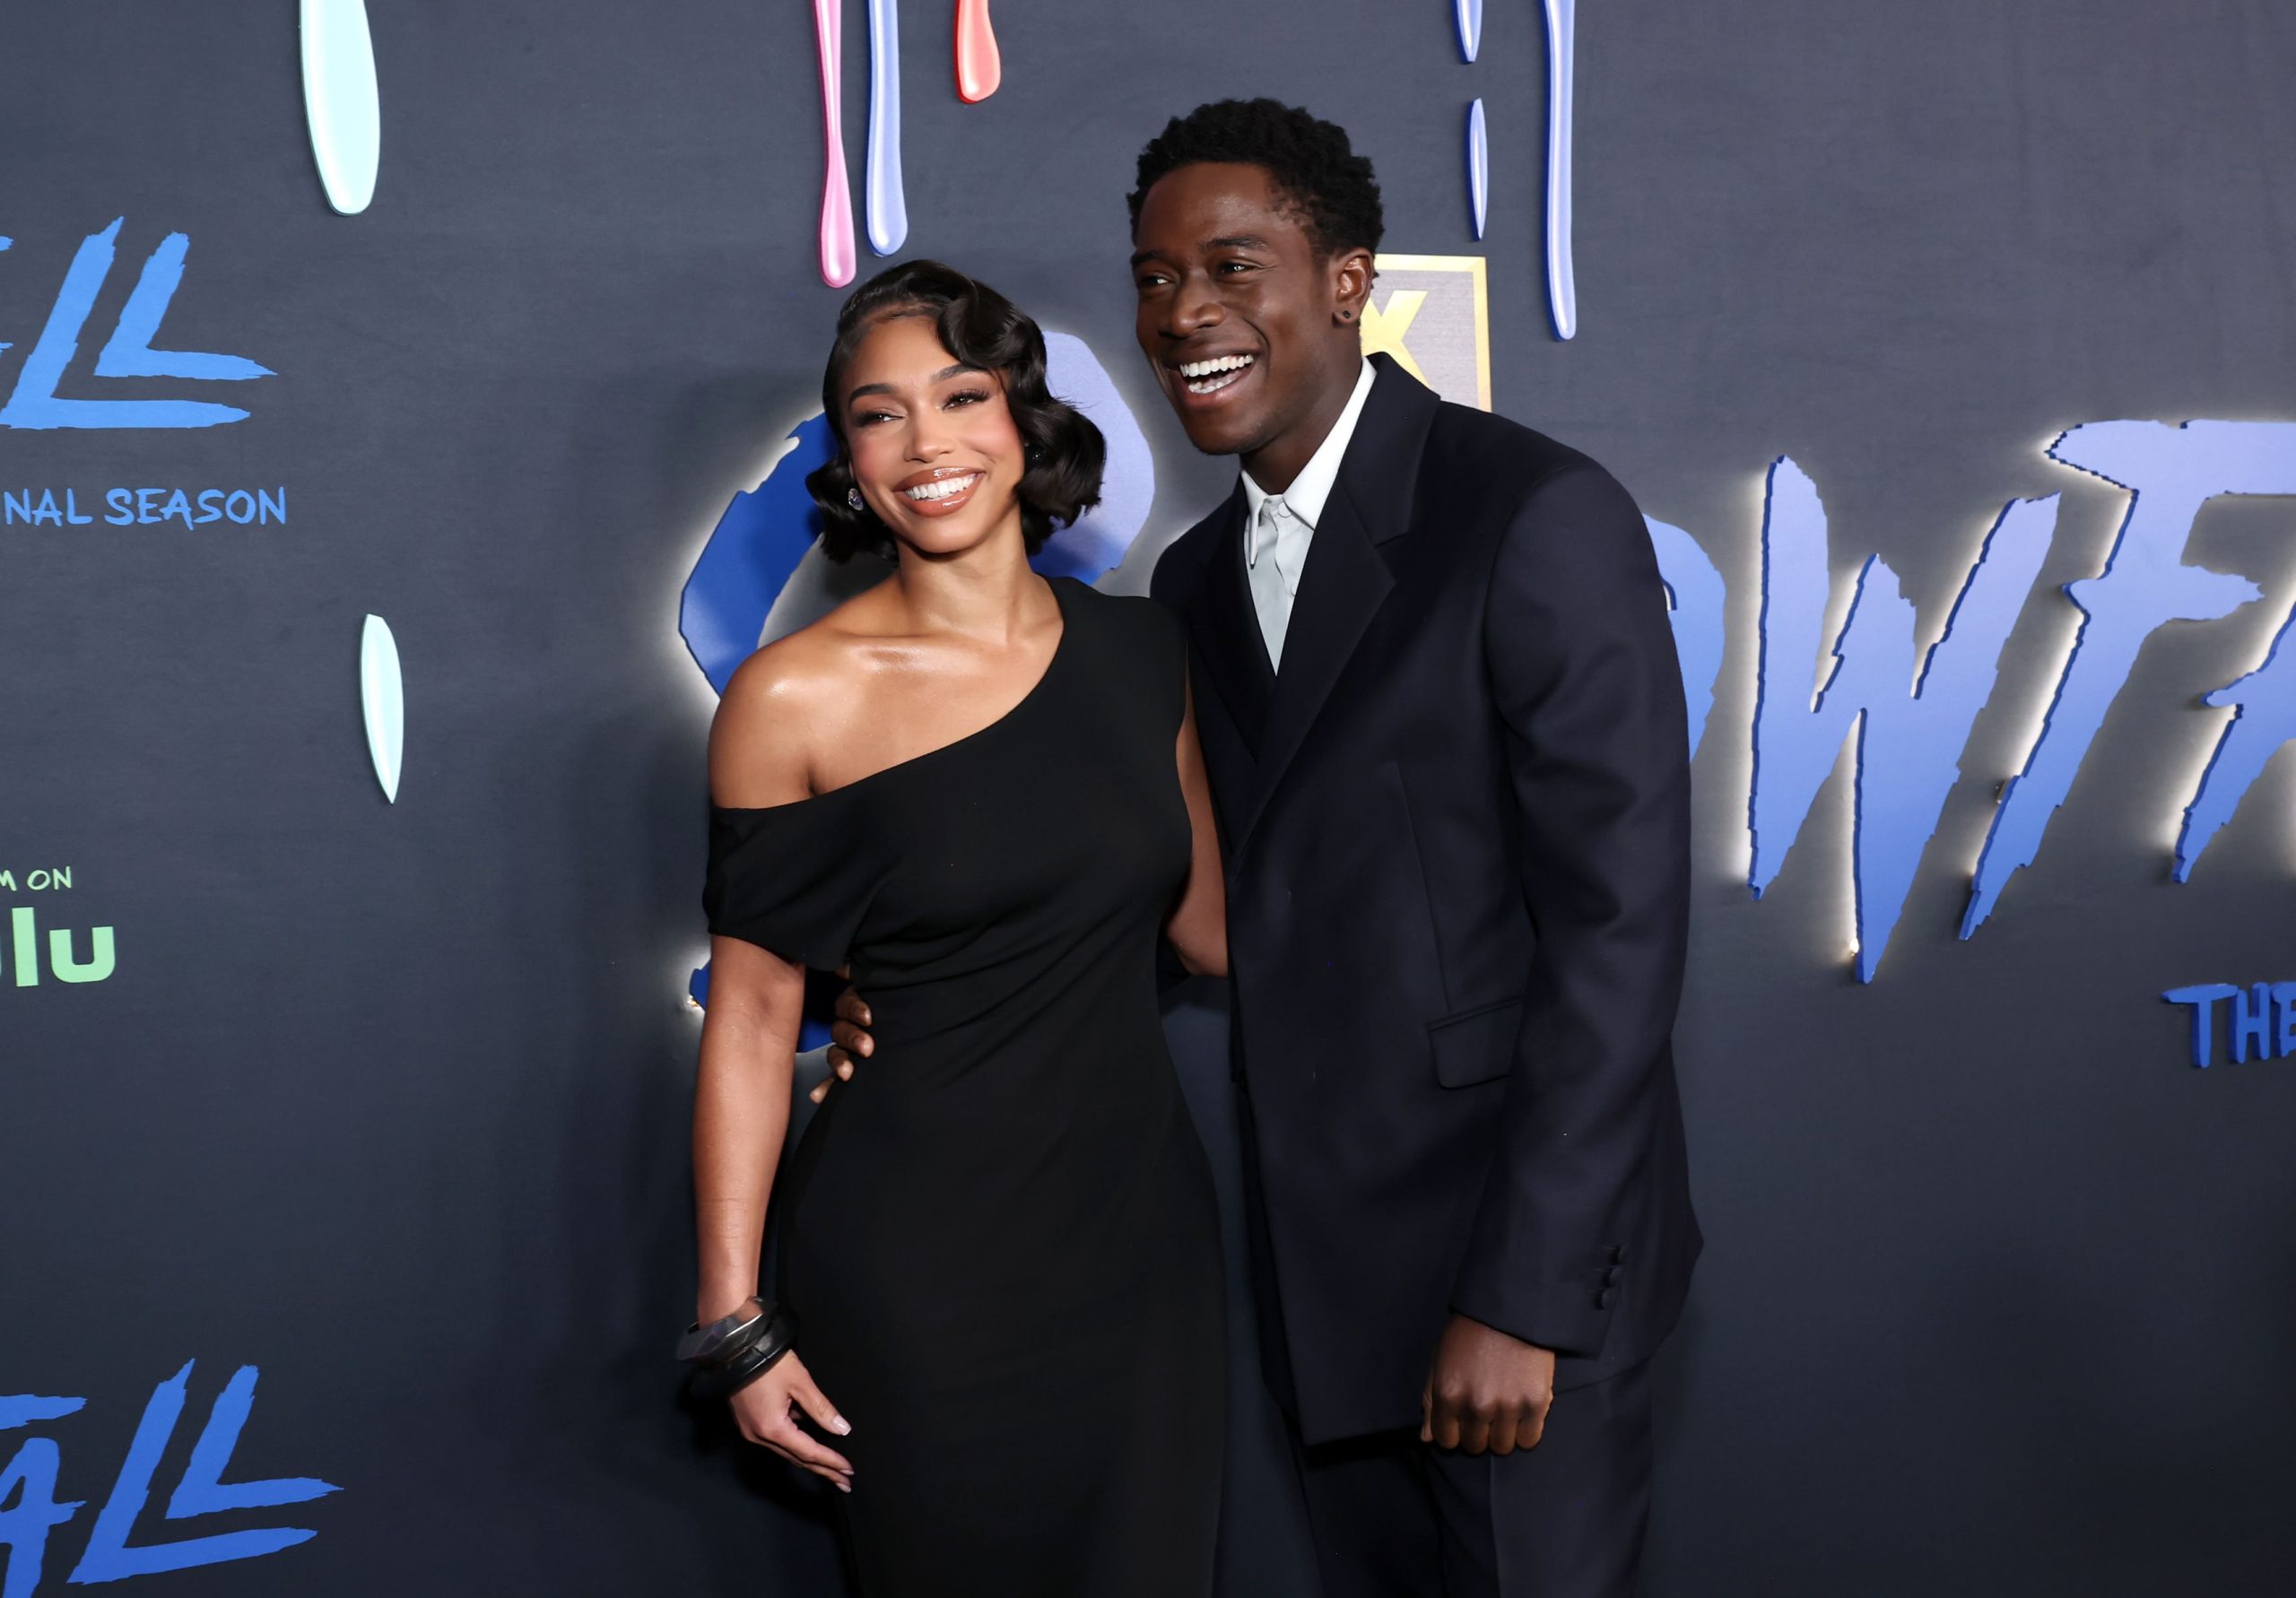 All To Know About Lori Harvey and Damson Idris Breakup